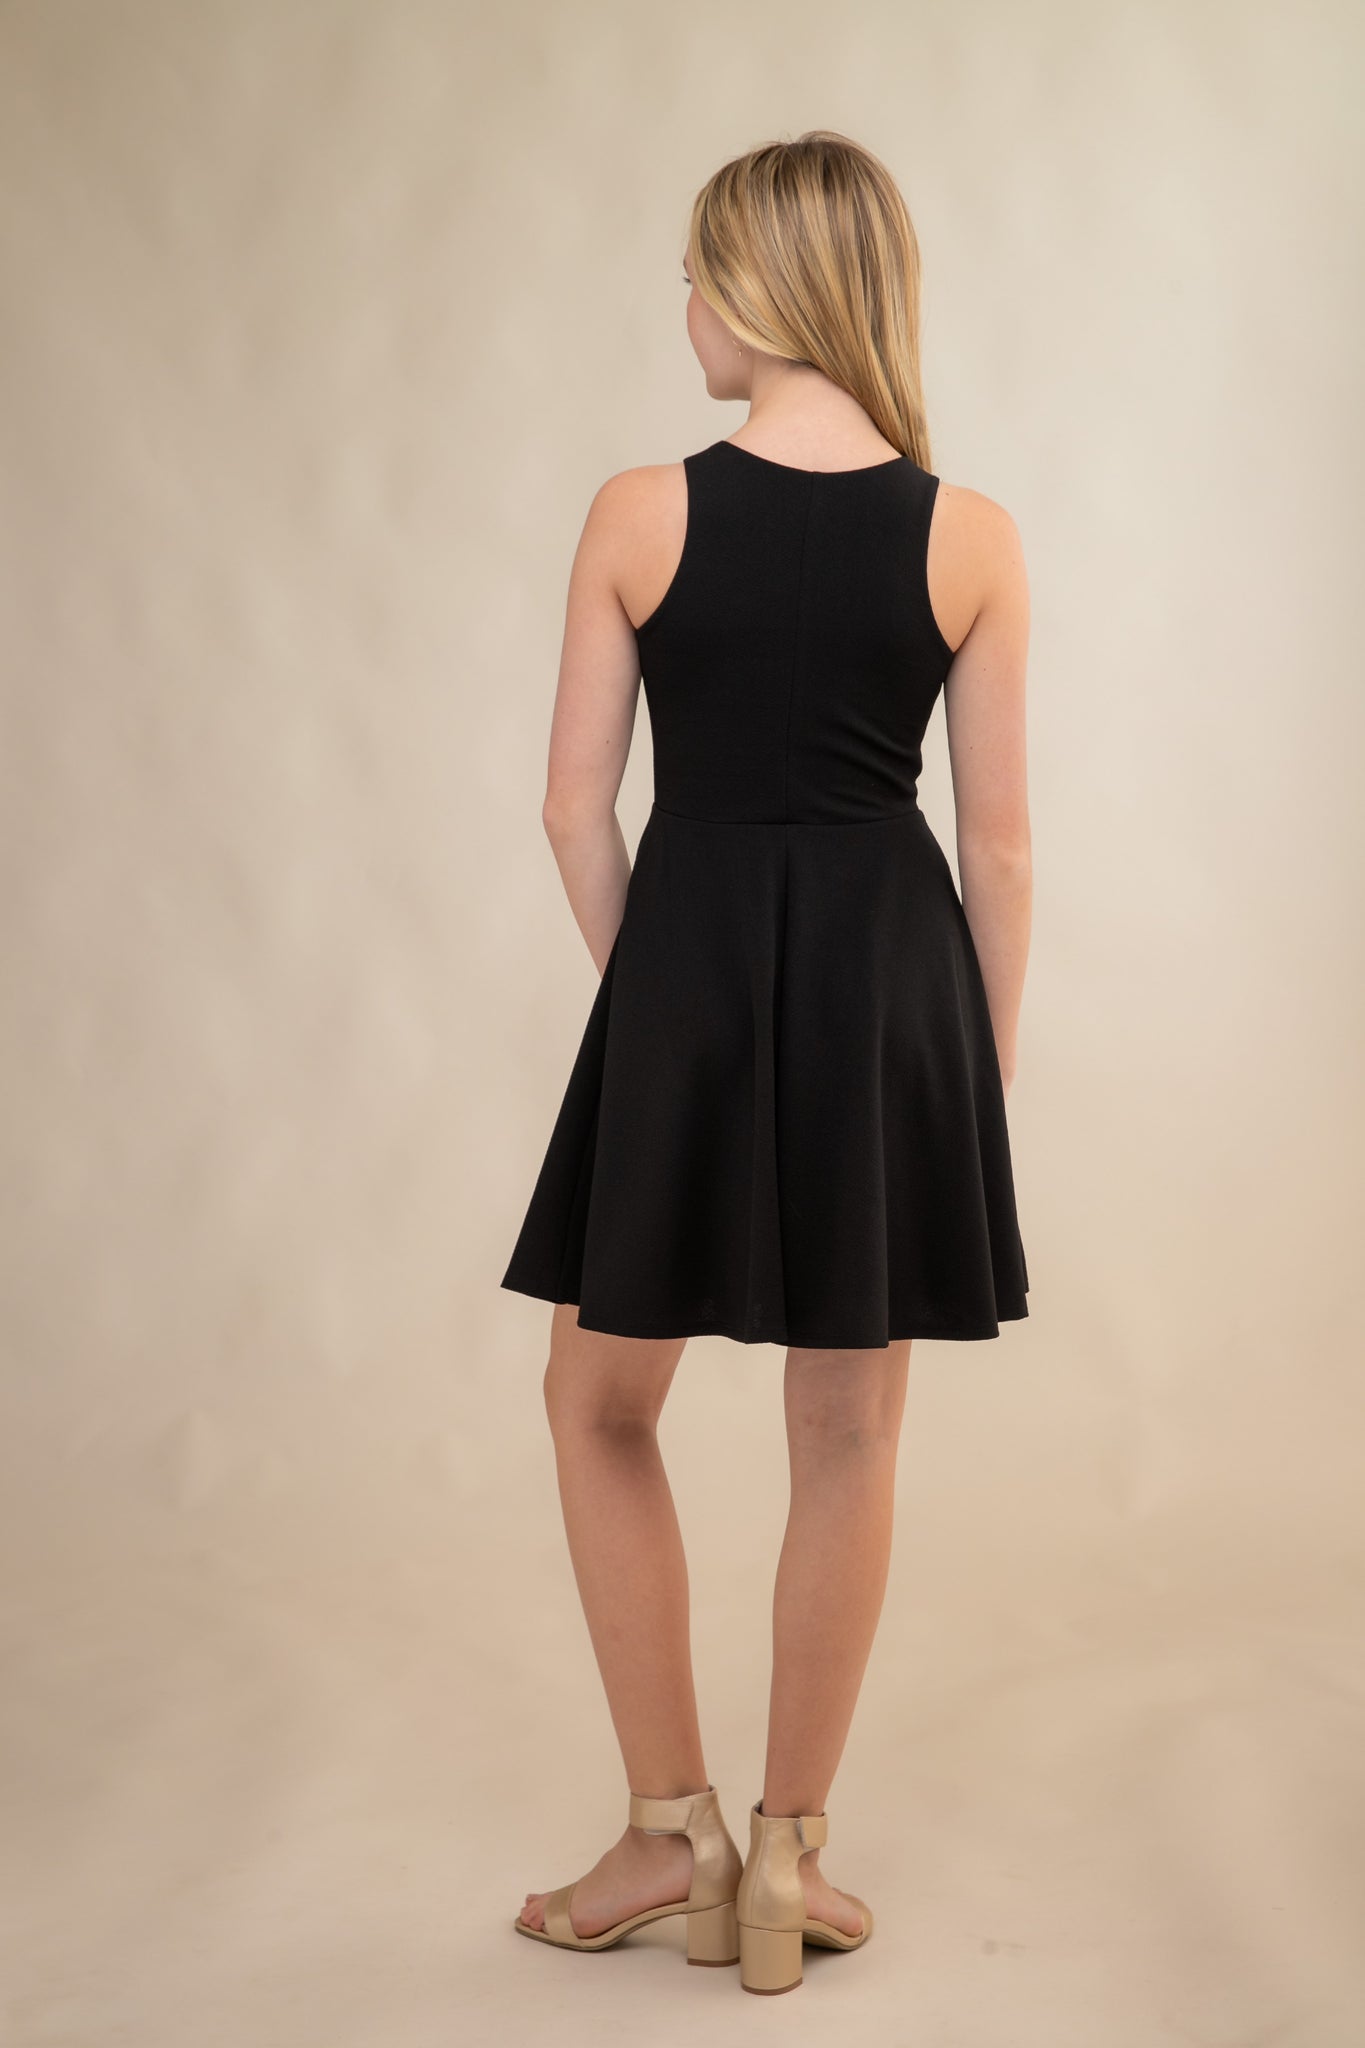 The tank style sleeve textured fit and flare dress is shown in black with high neck line, racerback detailing and dart bodice for a chic and sophisticated look. This dress can be worn to a more conservative special occasion event like cotillion, graduation, or religious service like a bat mitzvah service or church ceremony.